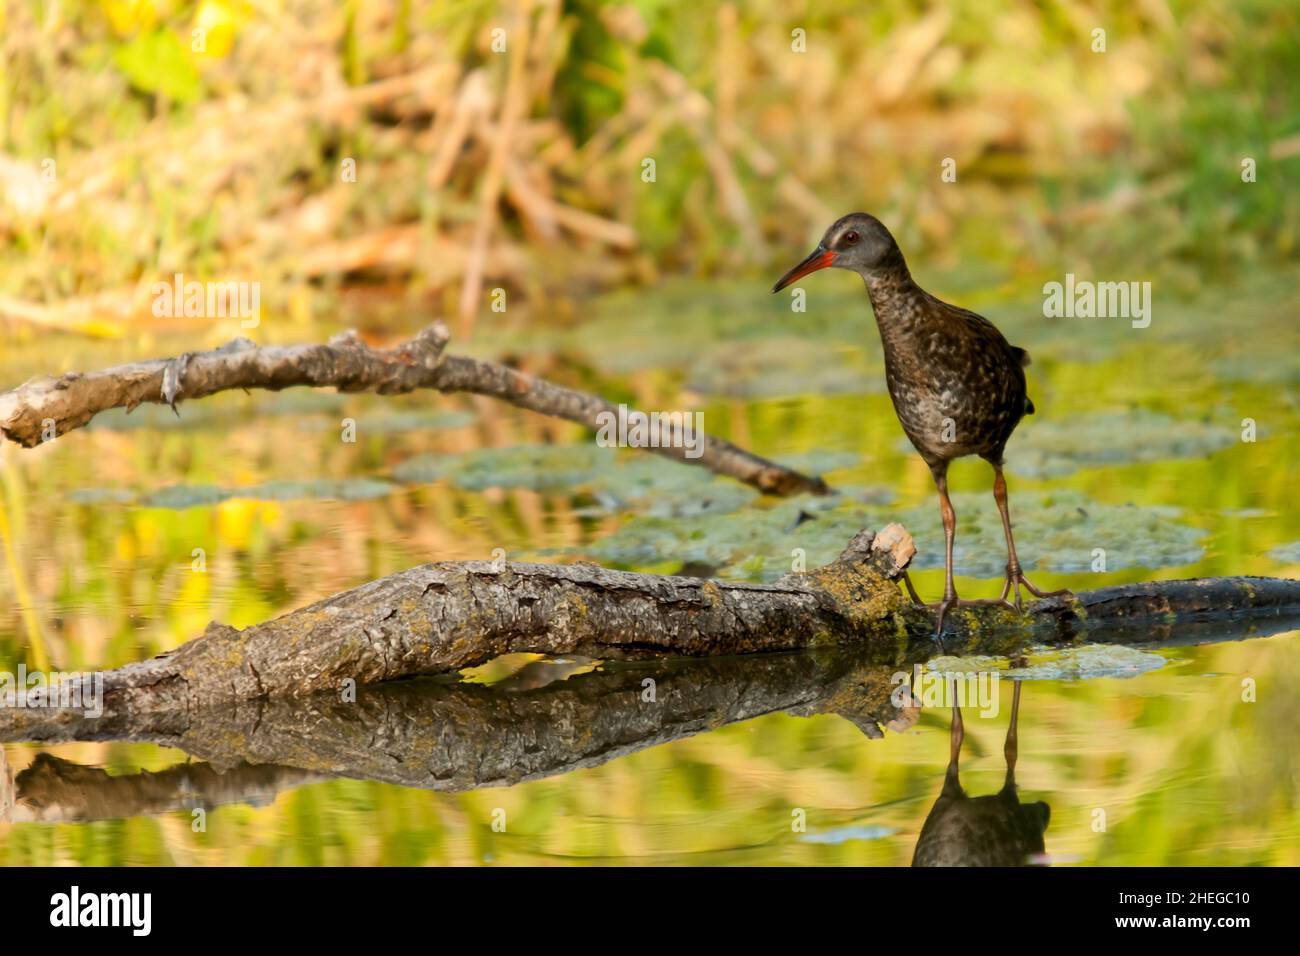 The European rail or common rail is a species of bird in the Rallidae family. Stock Photo